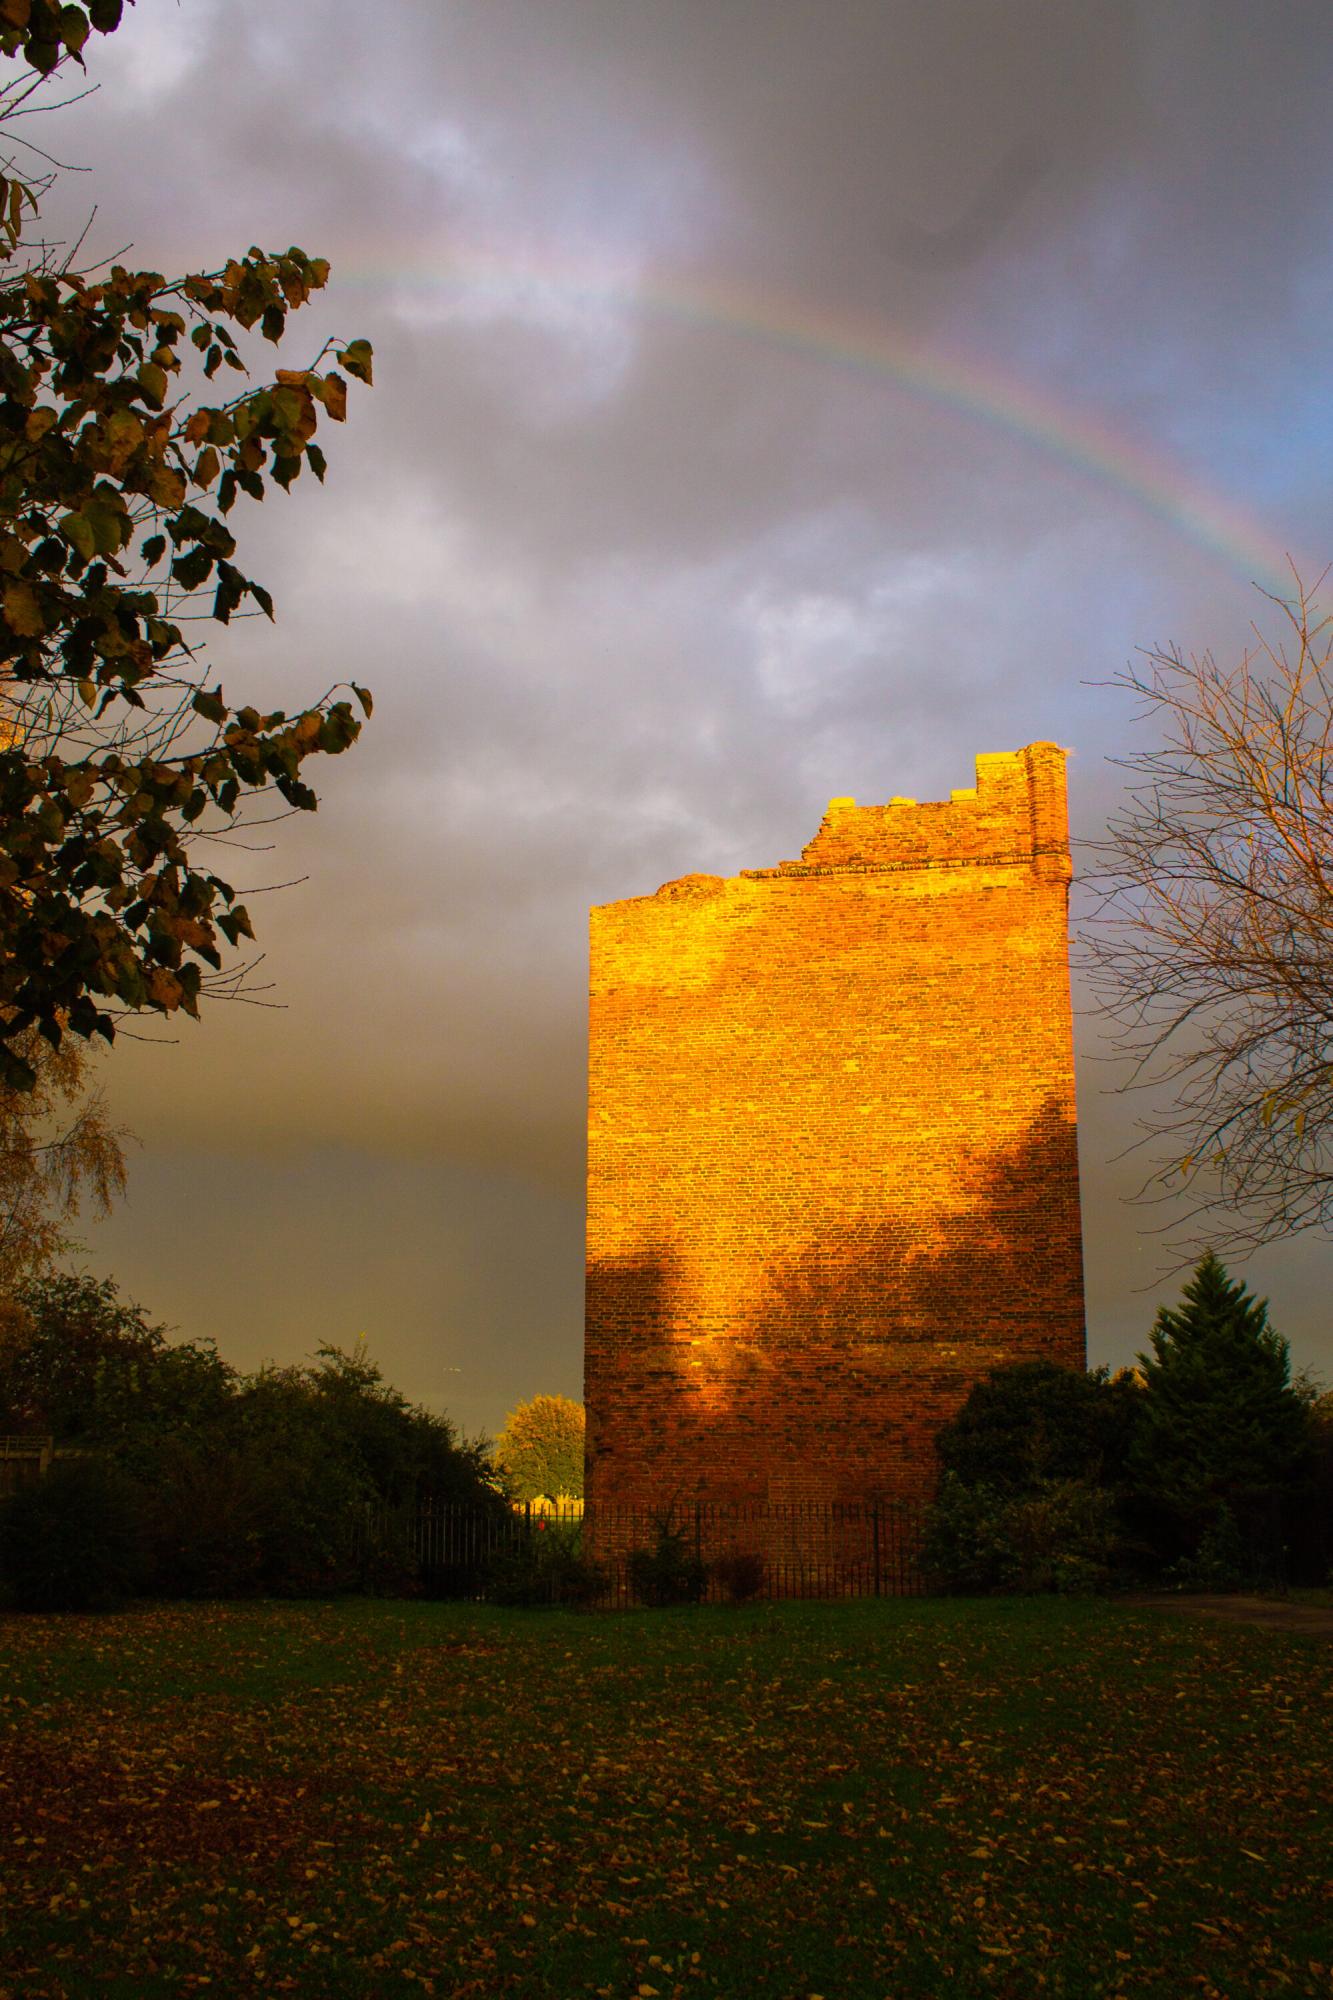 'Rainbow over Hussey Tower' by Fenny Johnson